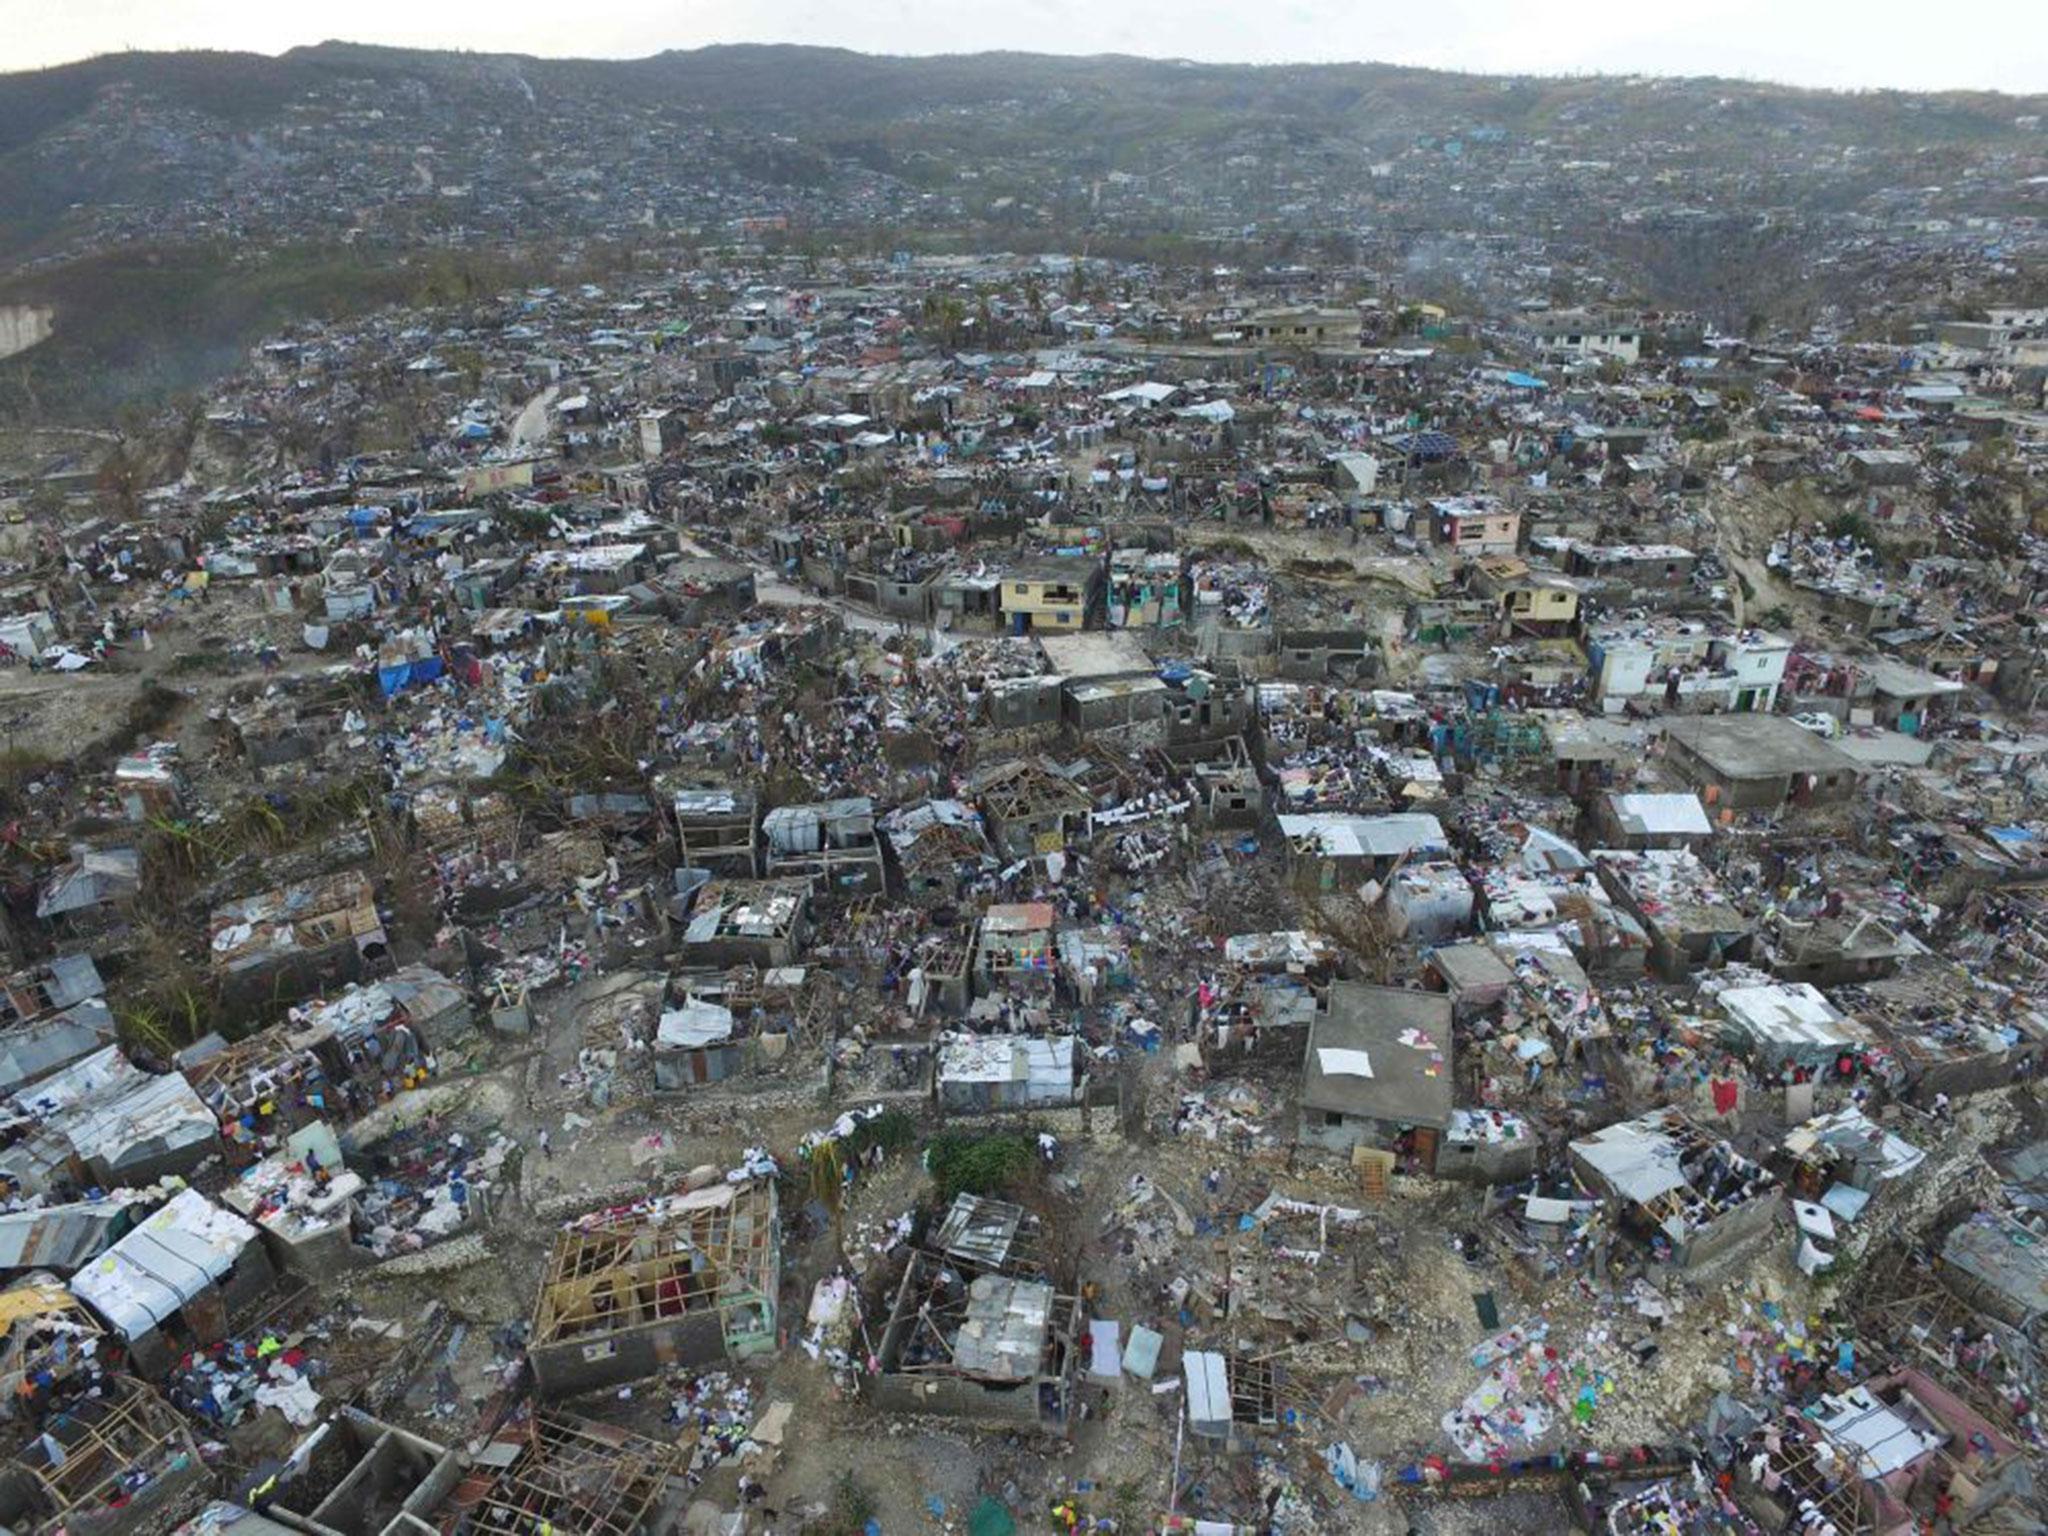 The town of Jeremie in western Haiti was almost completely destroyed